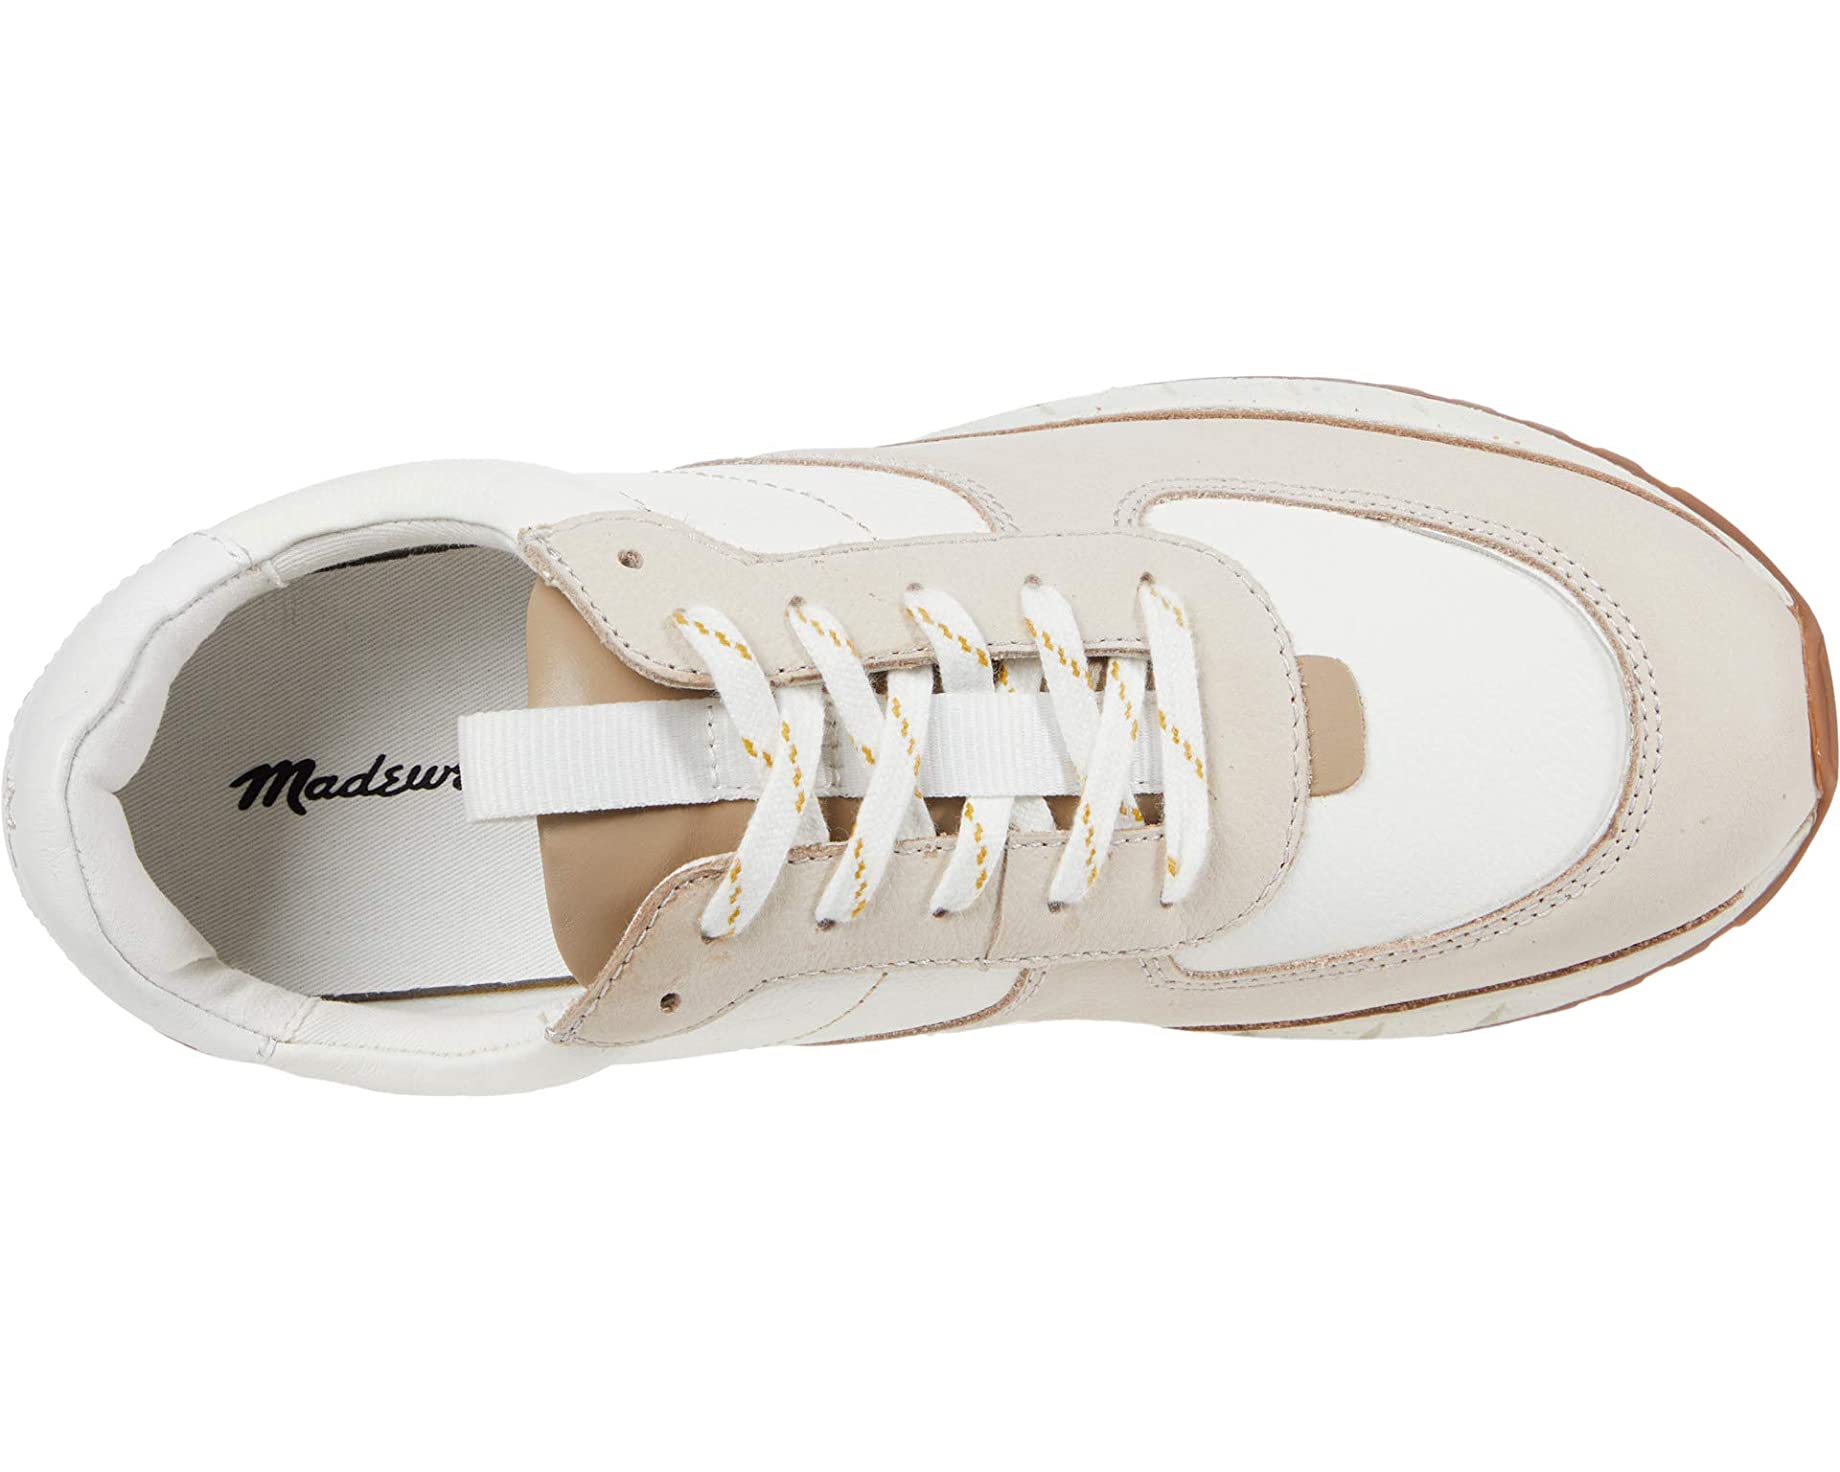 Кроссовки Kickoff Trainer Sneakers in Neutral Colorblock Leather Madewell, кремовый цена и фото